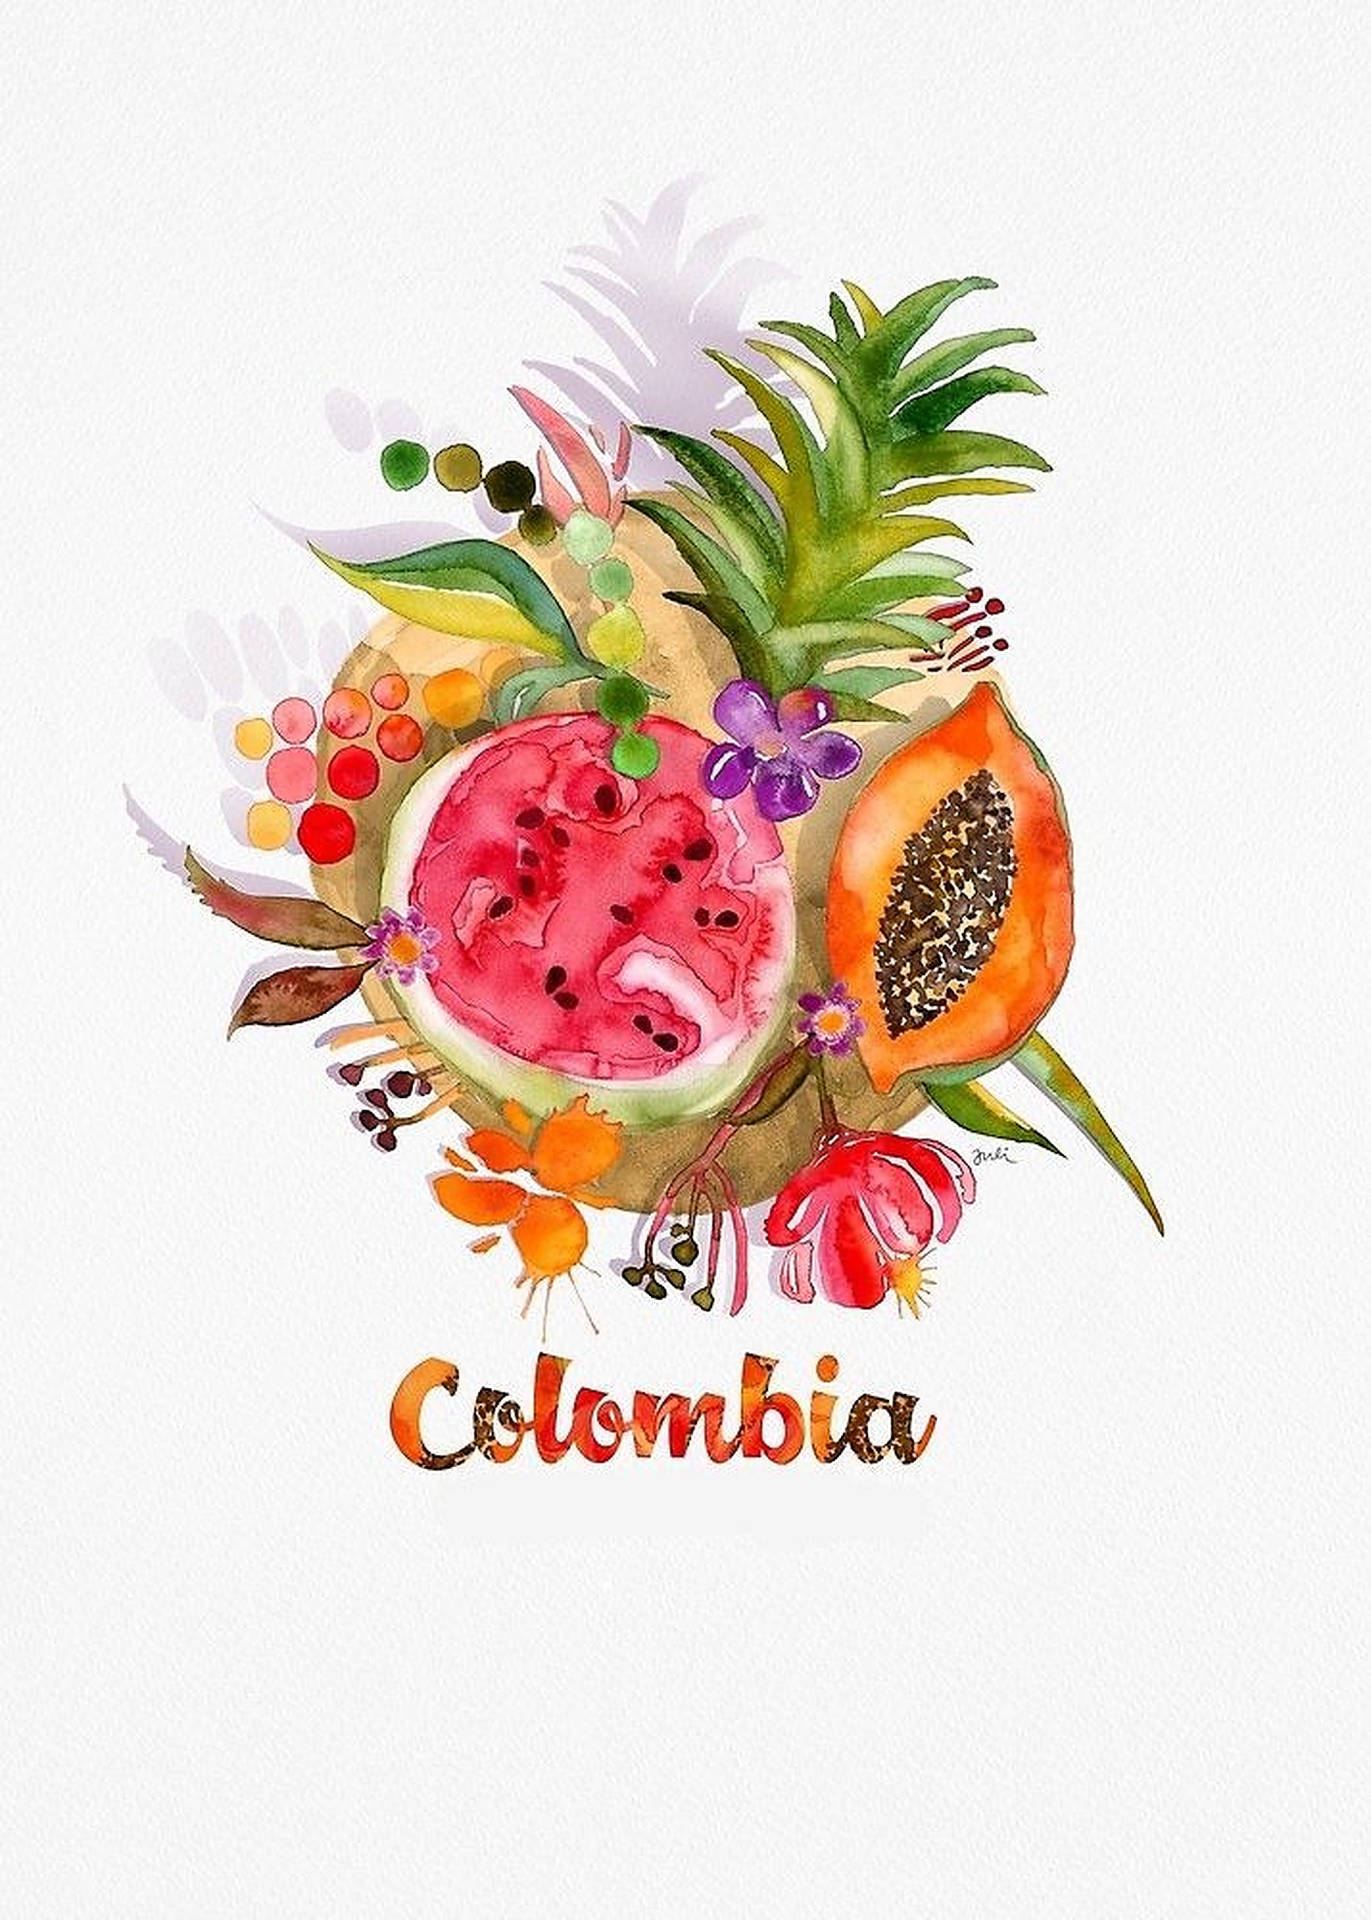 Colombia Fruits Illustration Wallpaper